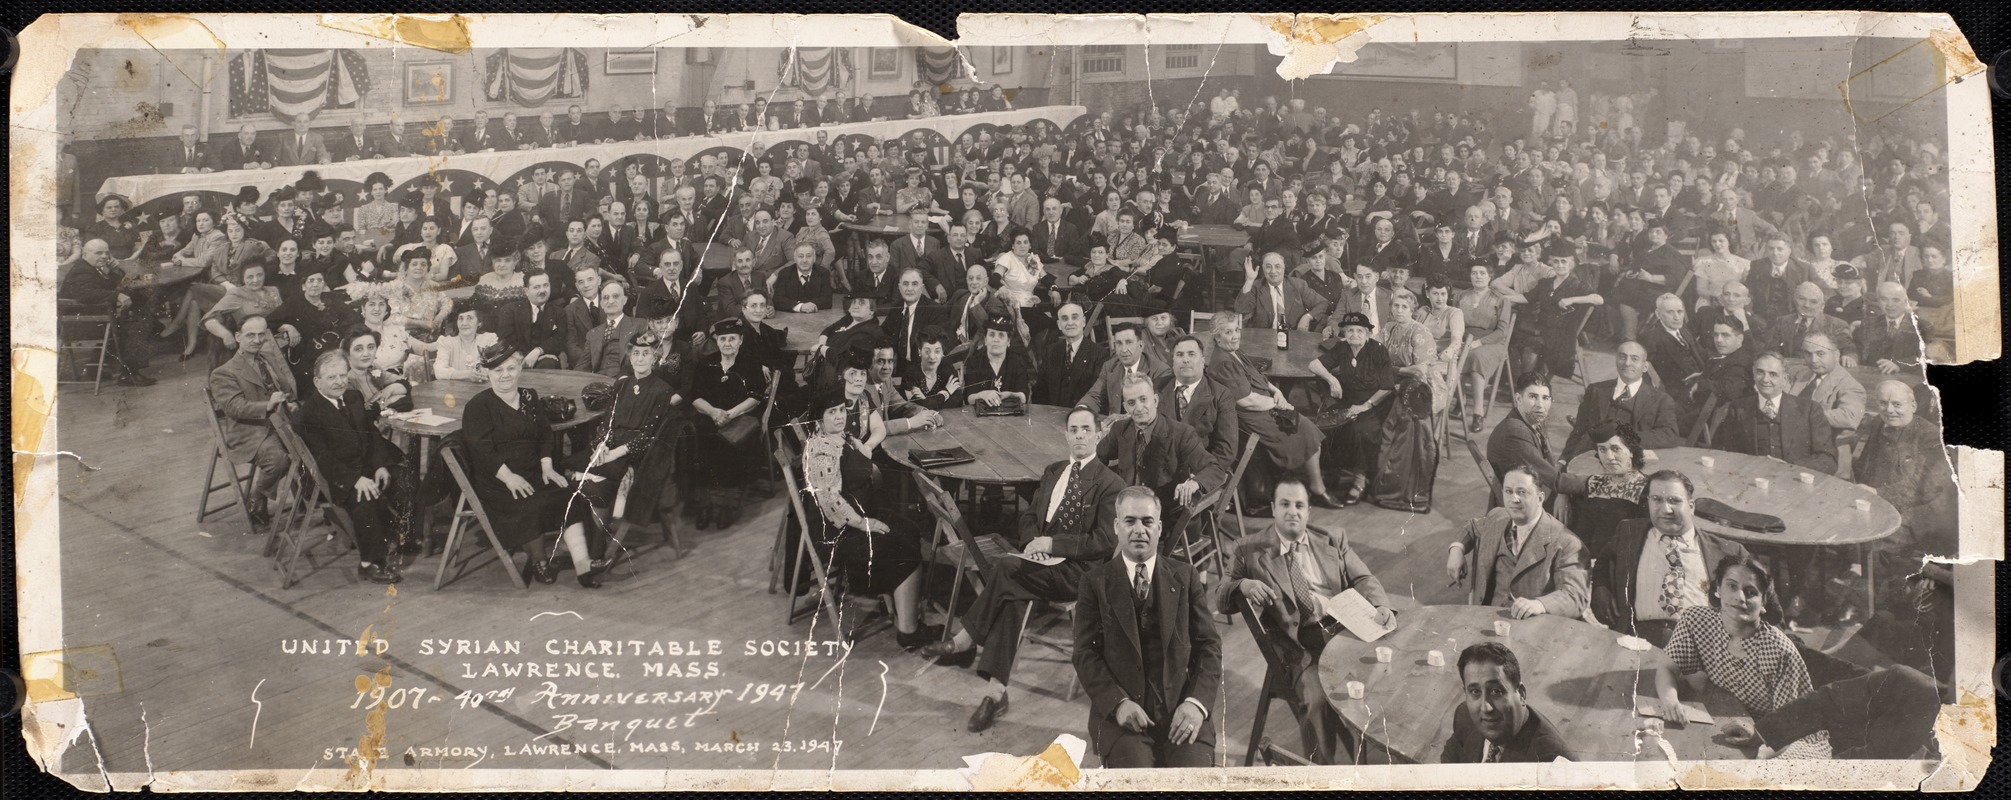 historic photo of the society's 40th anniversary celebration in 1947